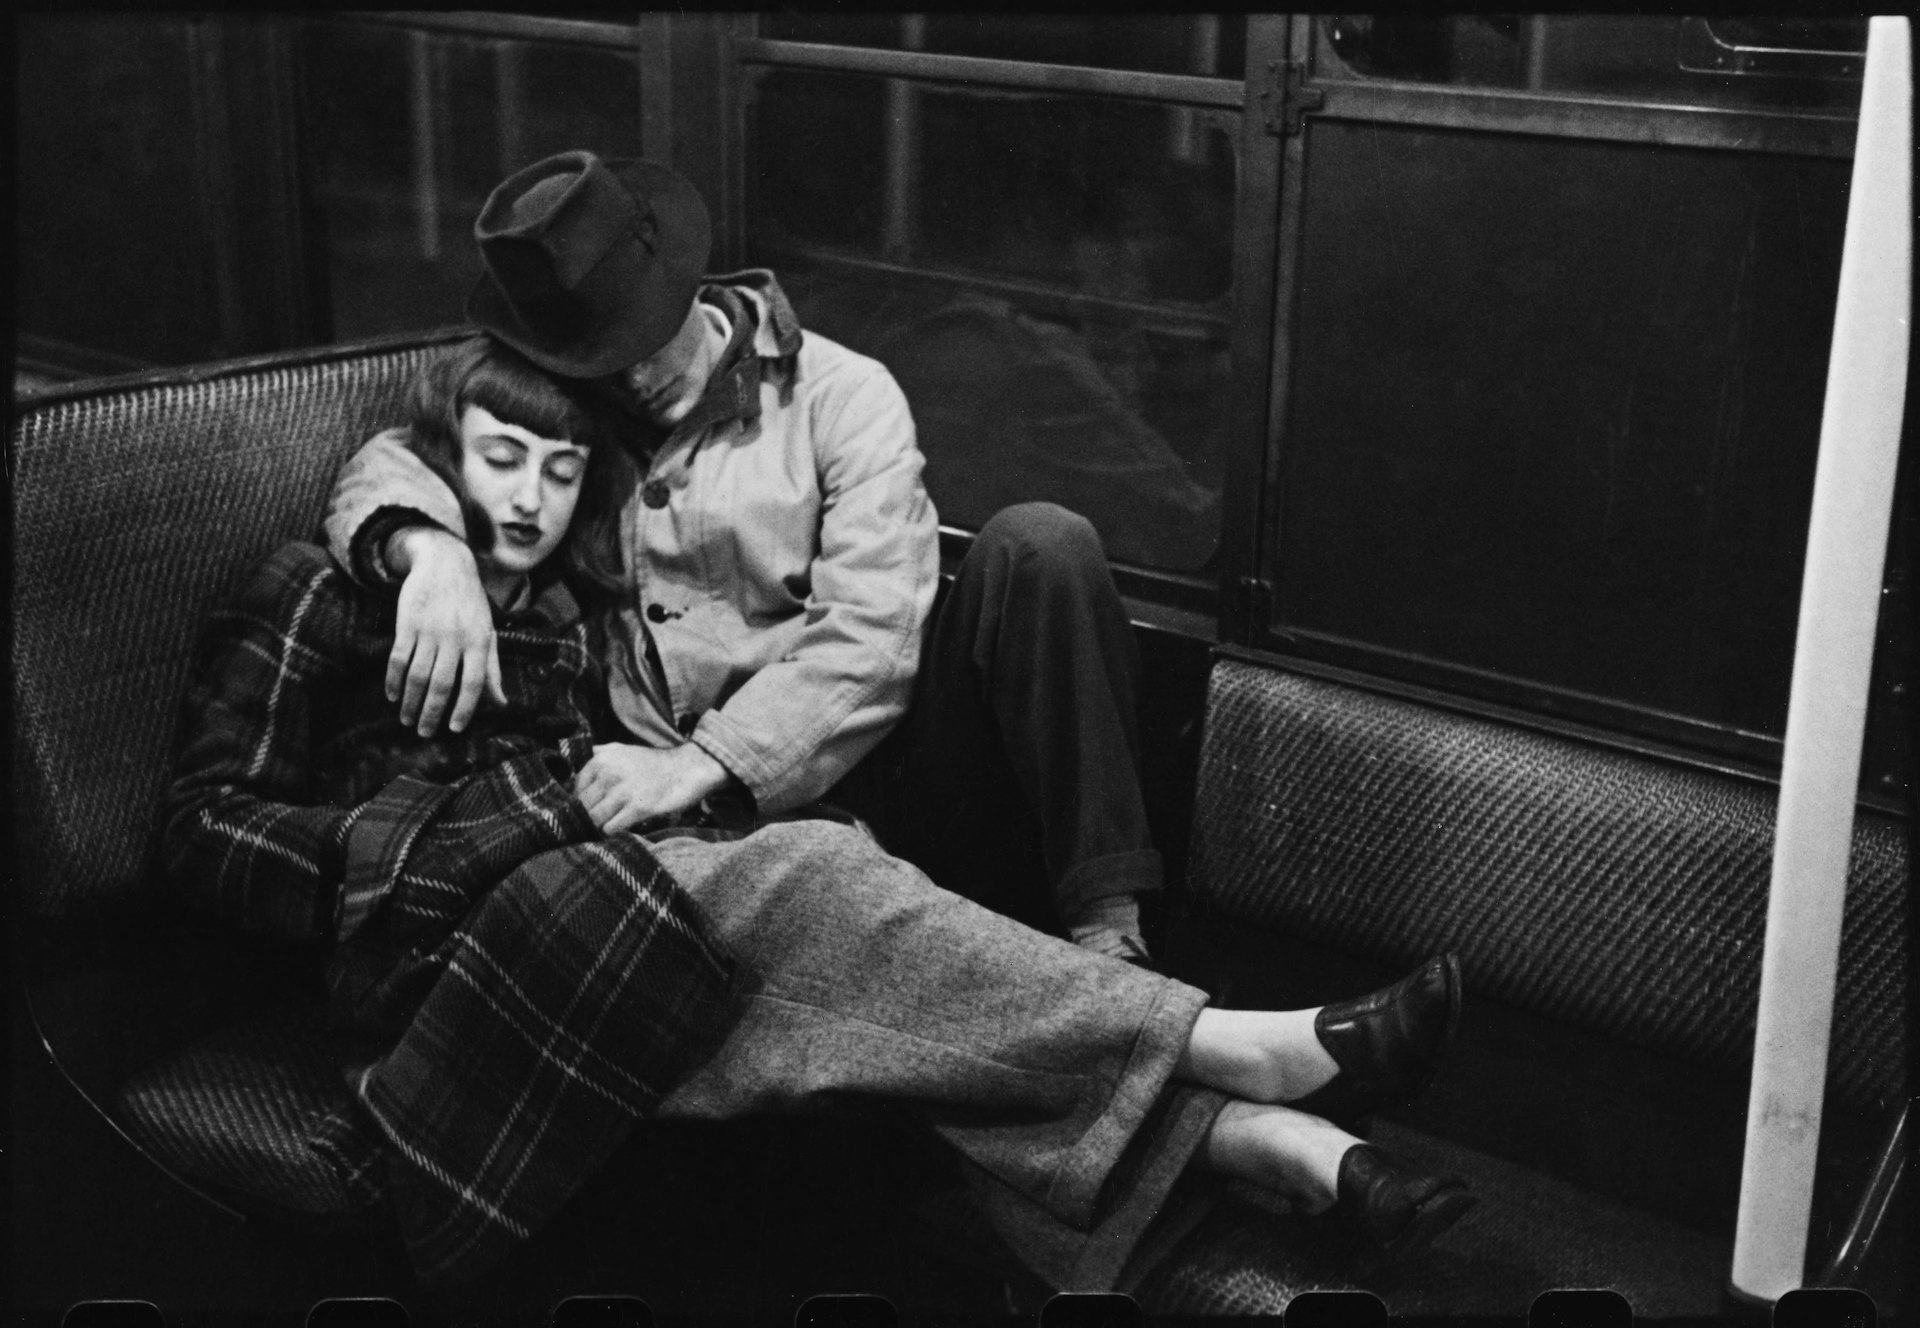 Stanley Kubrick, from “Life and Love on the New York City Subway”, 1947